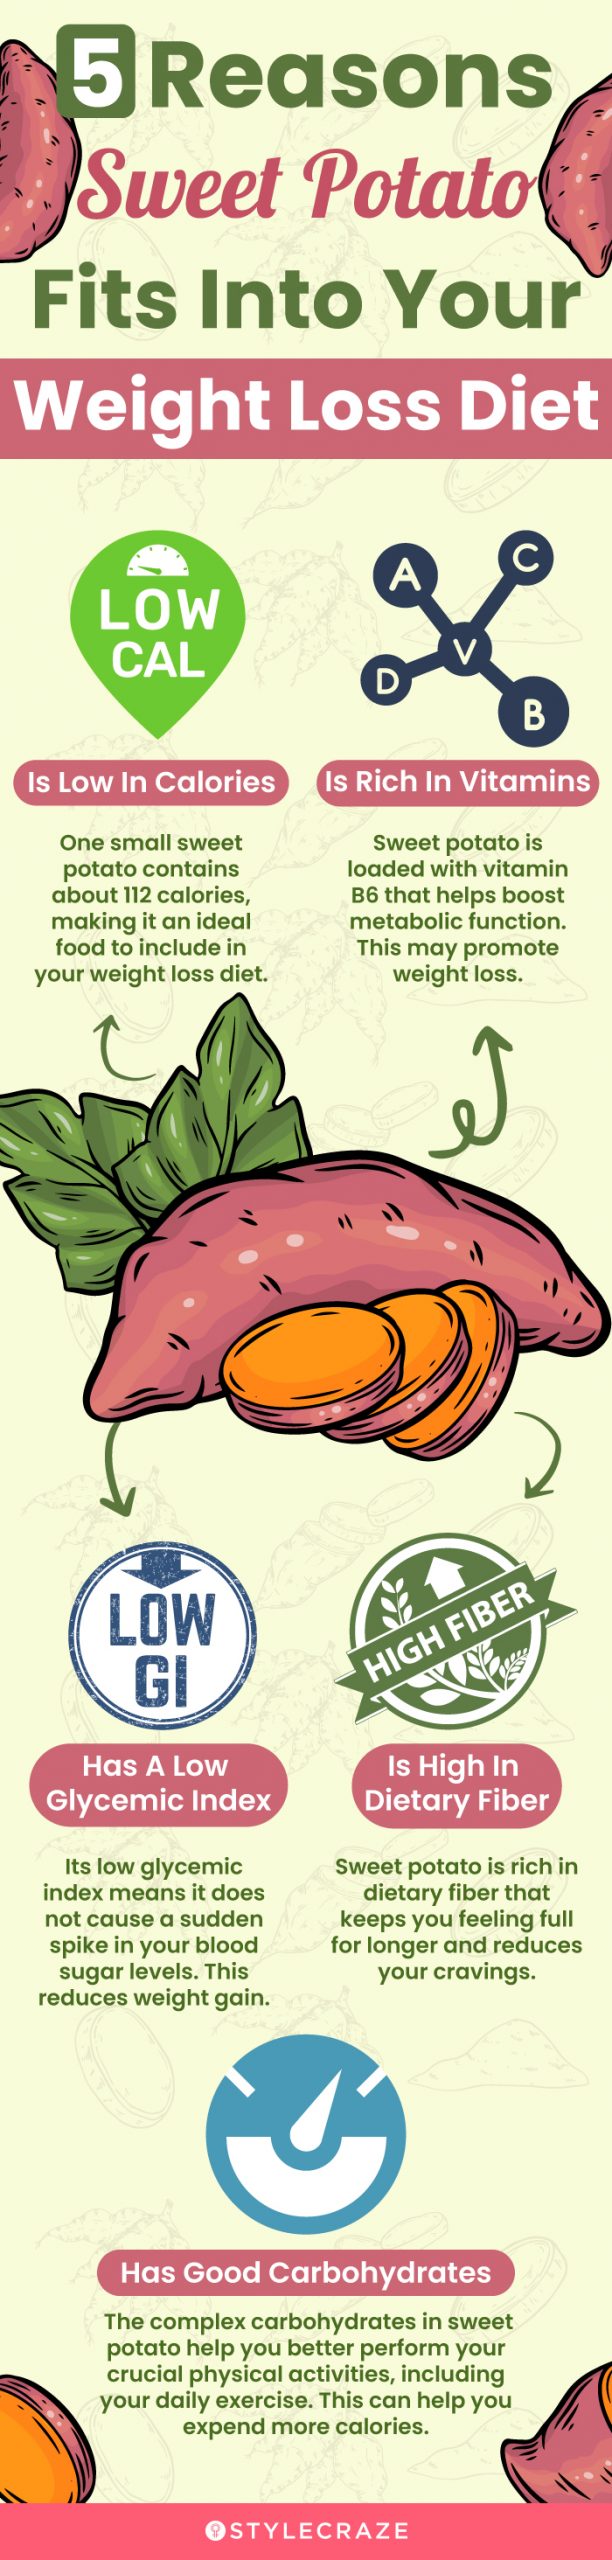 5 reasons sweet potato fits into your weight loss diet (infographic)